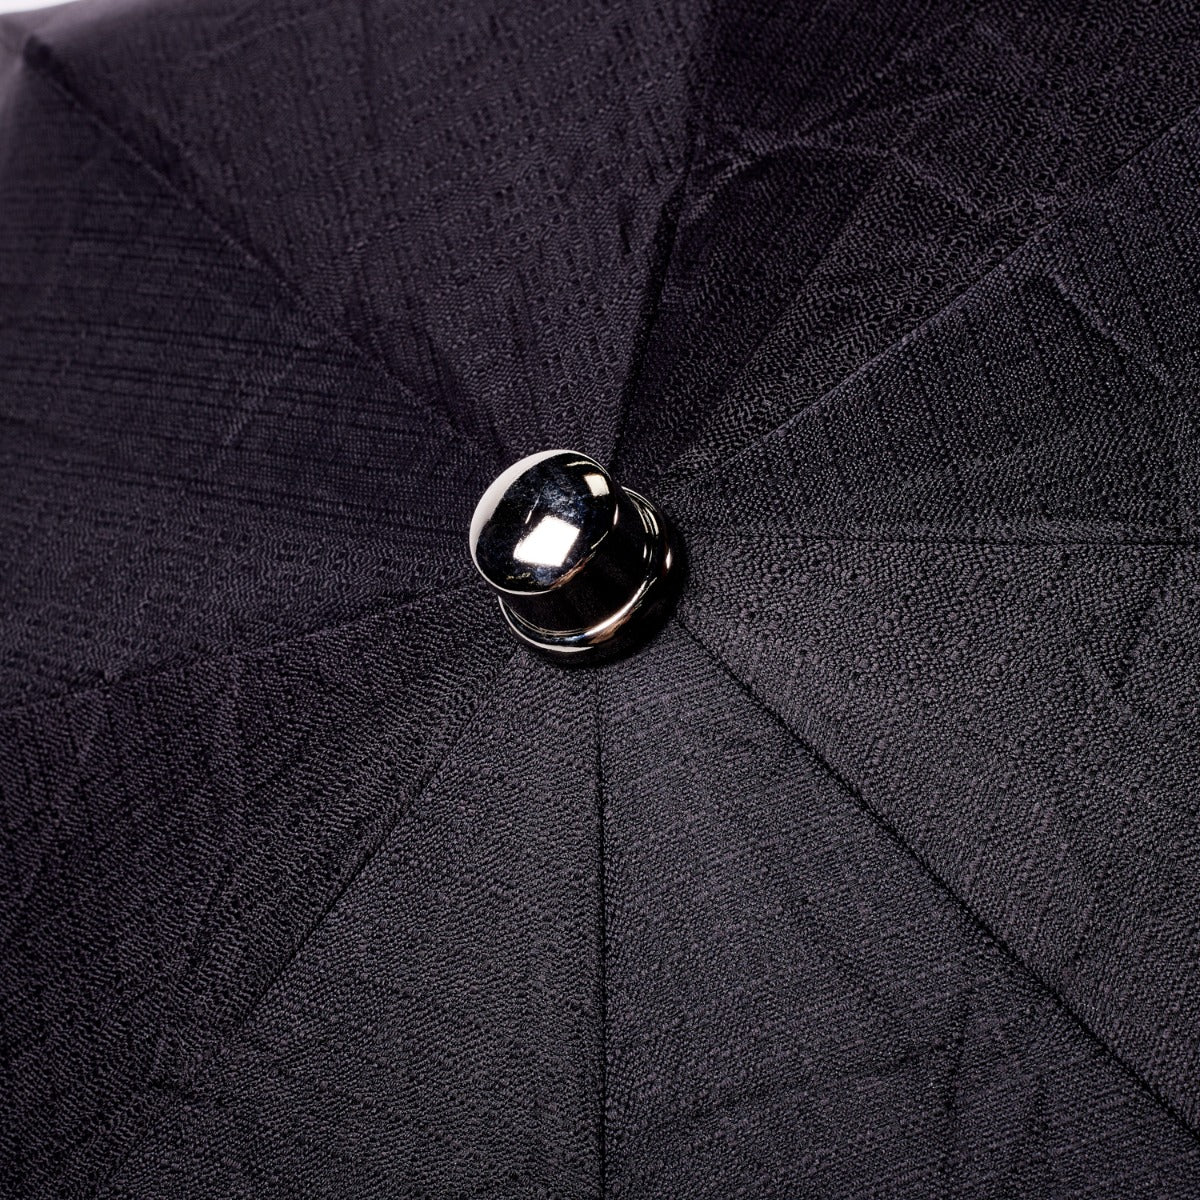 A Brown Pigskin Travel Umbrella with Black Canopy made by KirbyAllison.com.